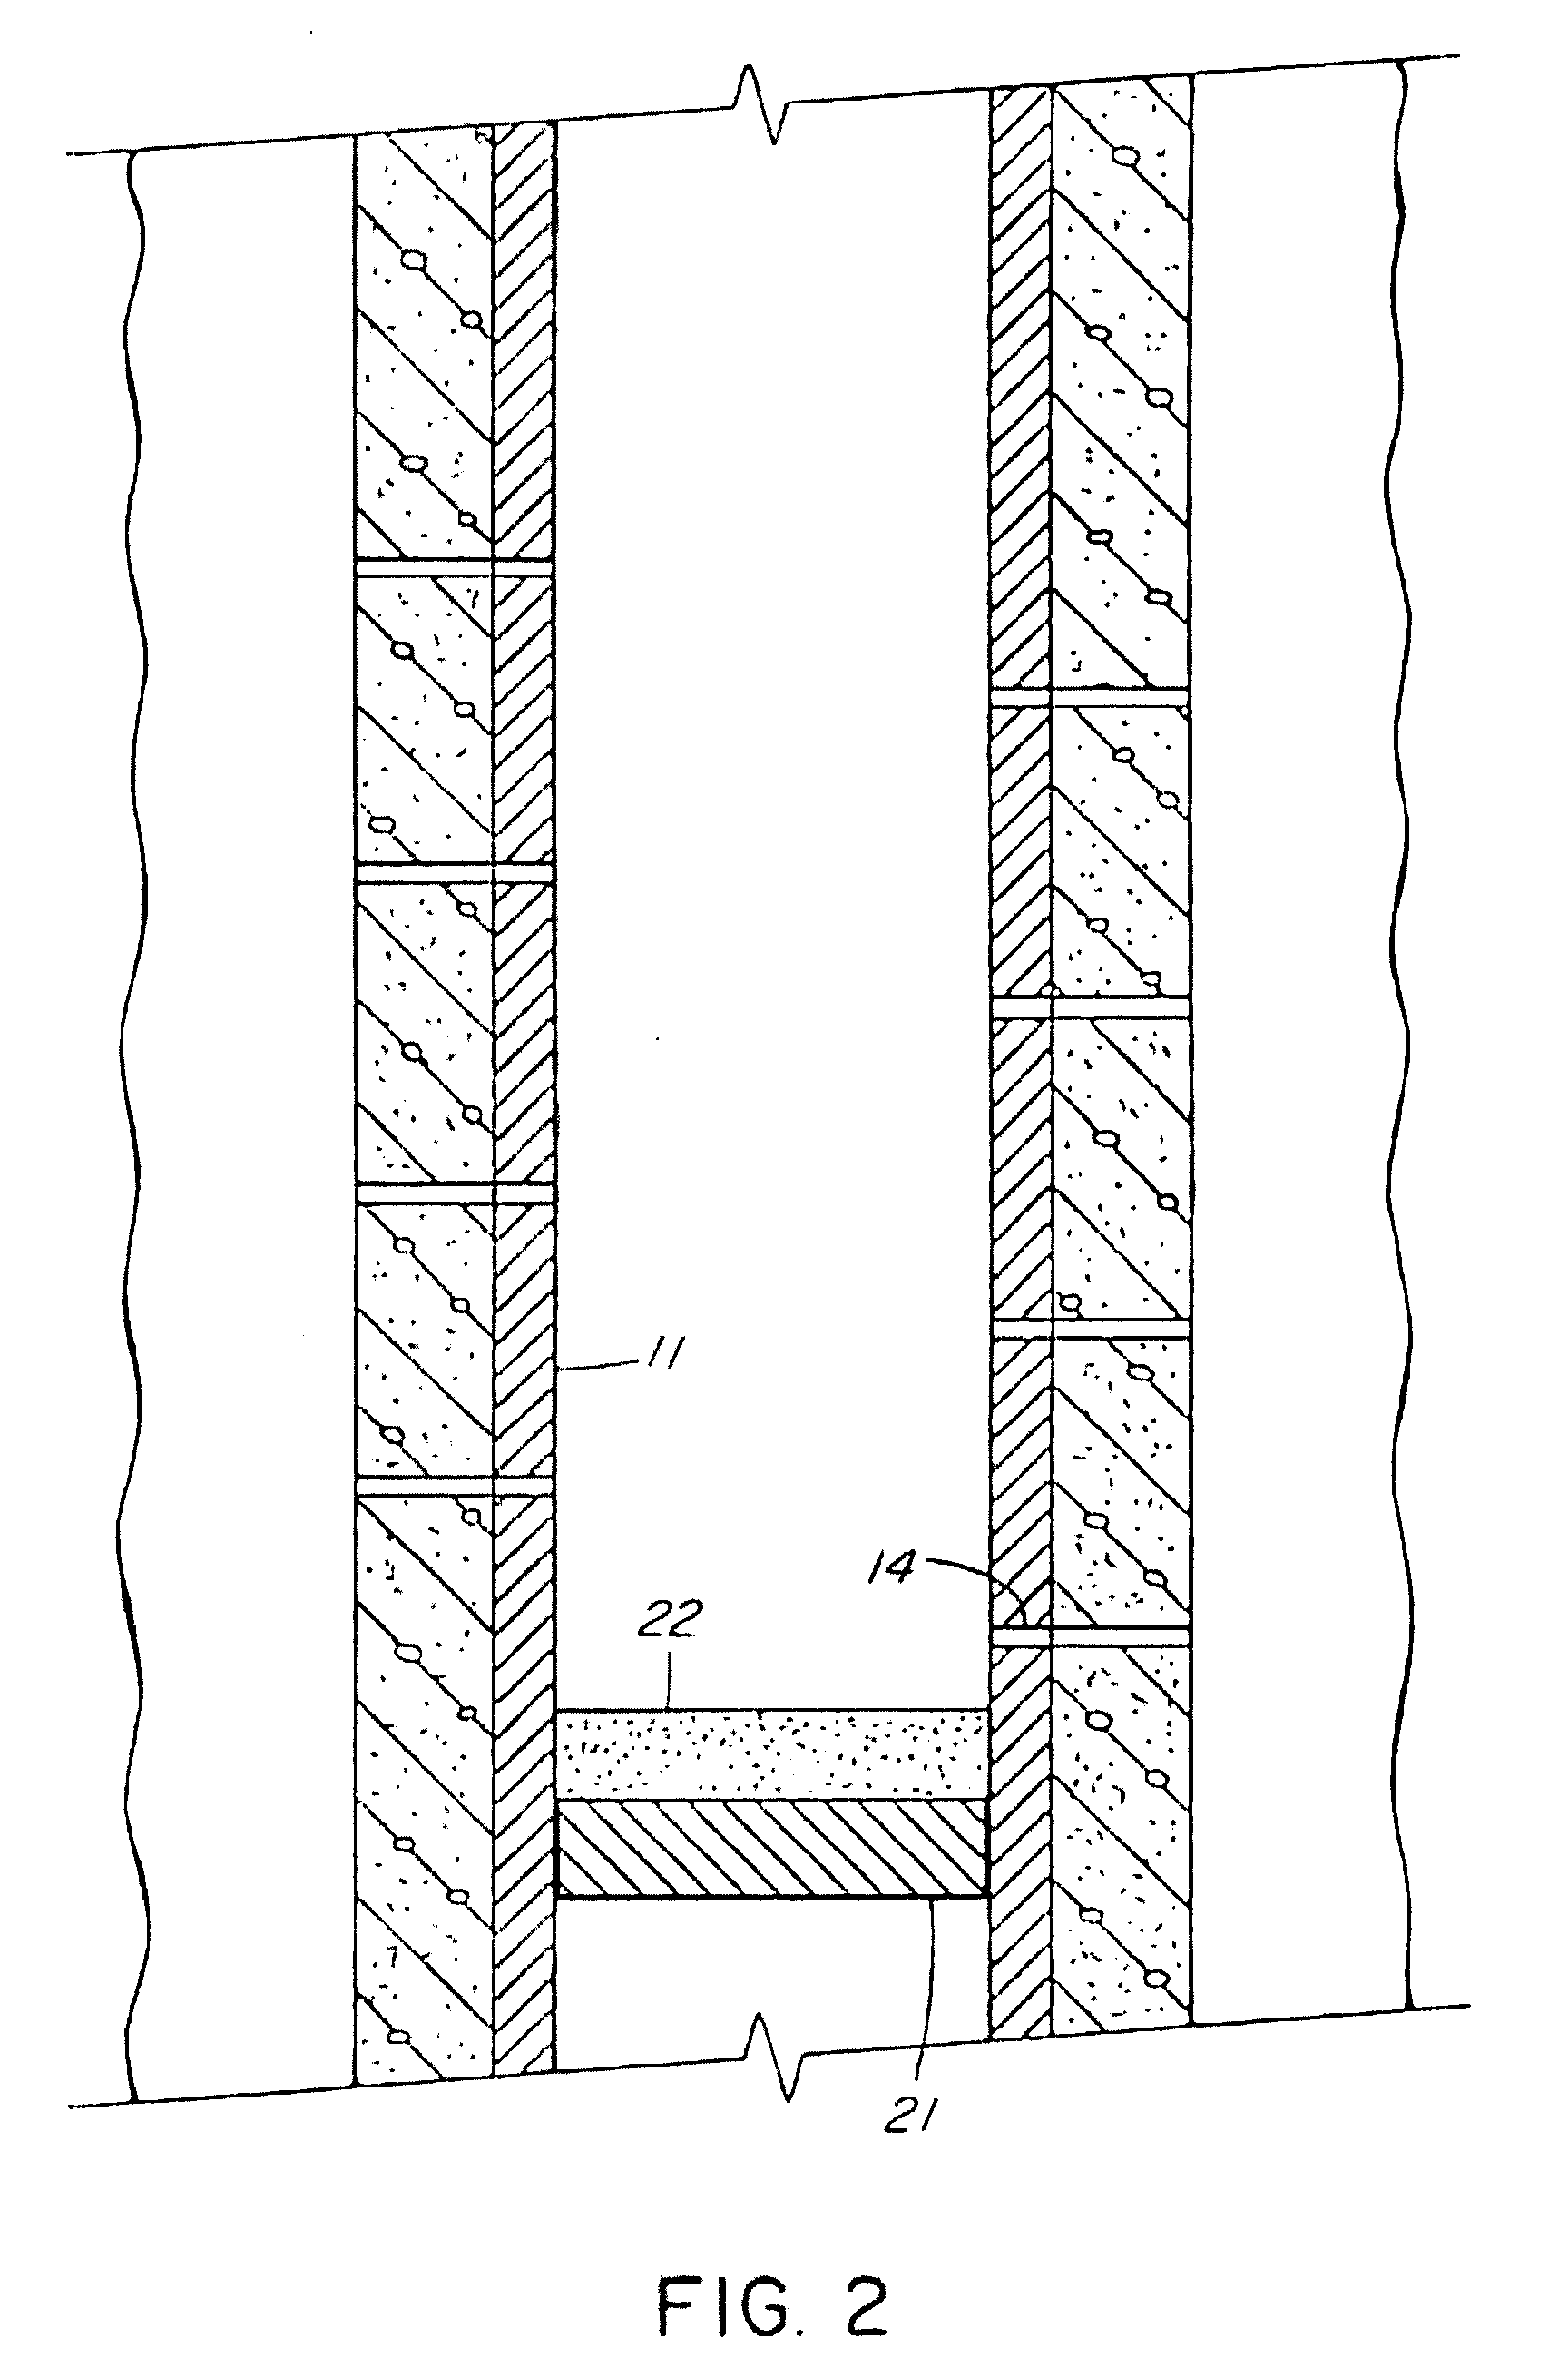 Method and apparatus for plugging perforations